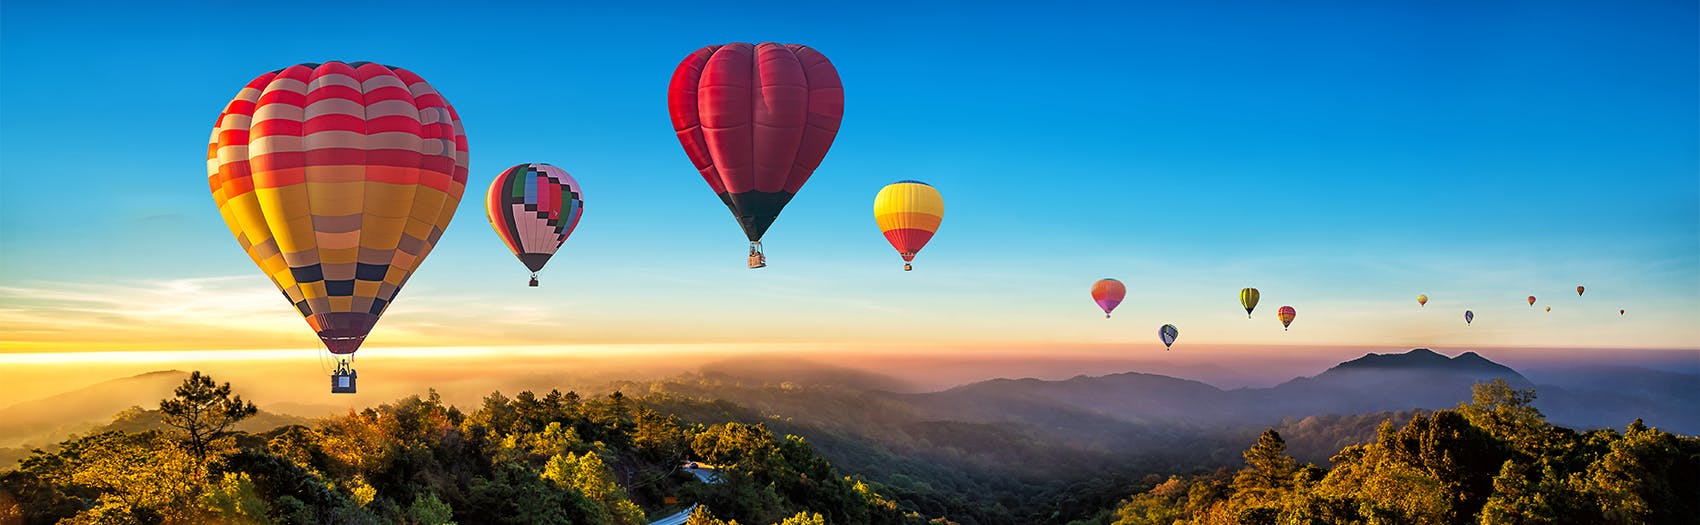 Hot air balloons in the air over a scenic valley